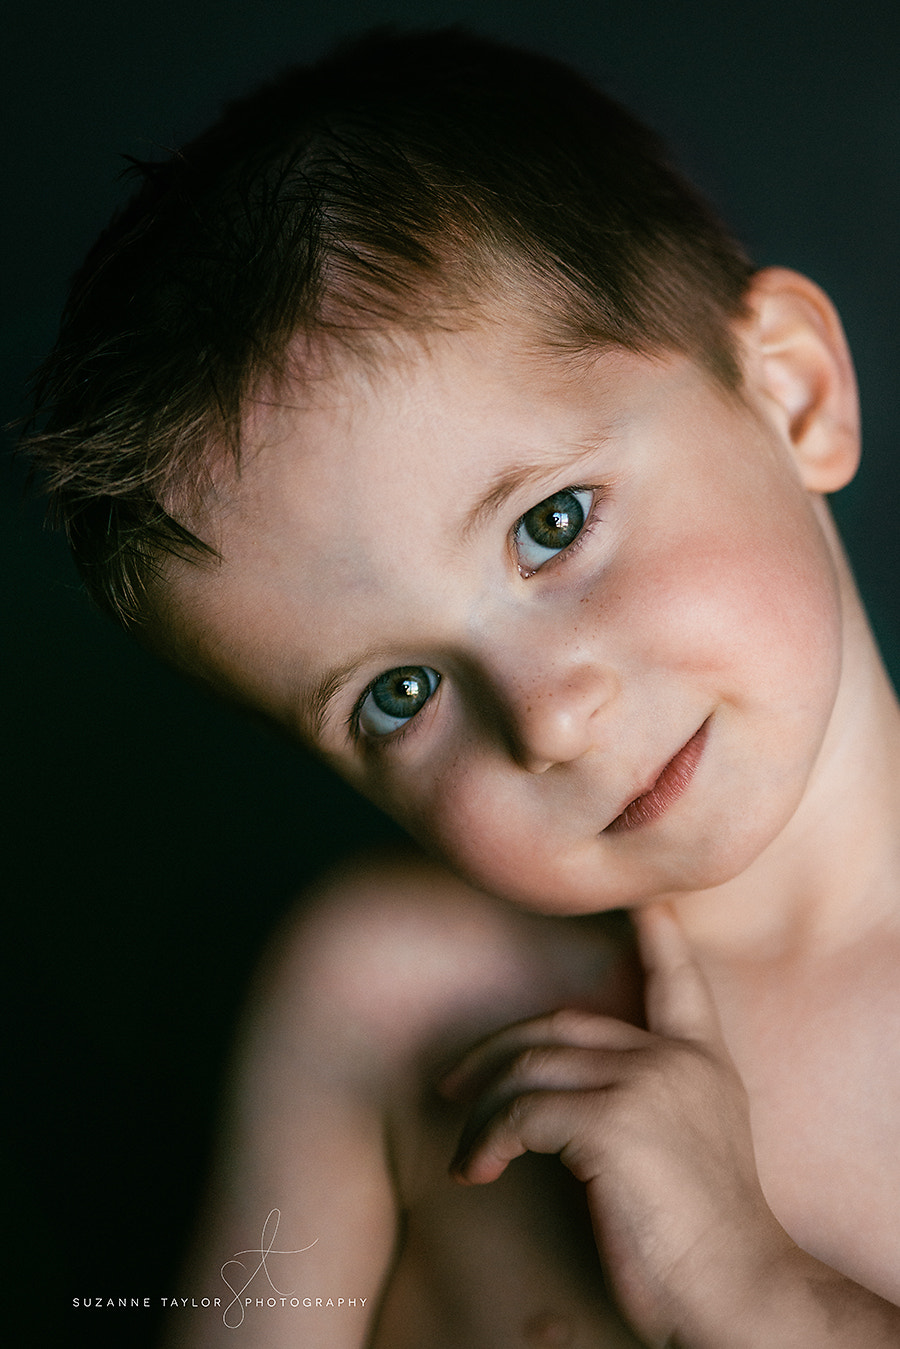 Nikon D800 + AF Micro-Nikkor 105mm f/2.8 sample photo. What a little mr. photography